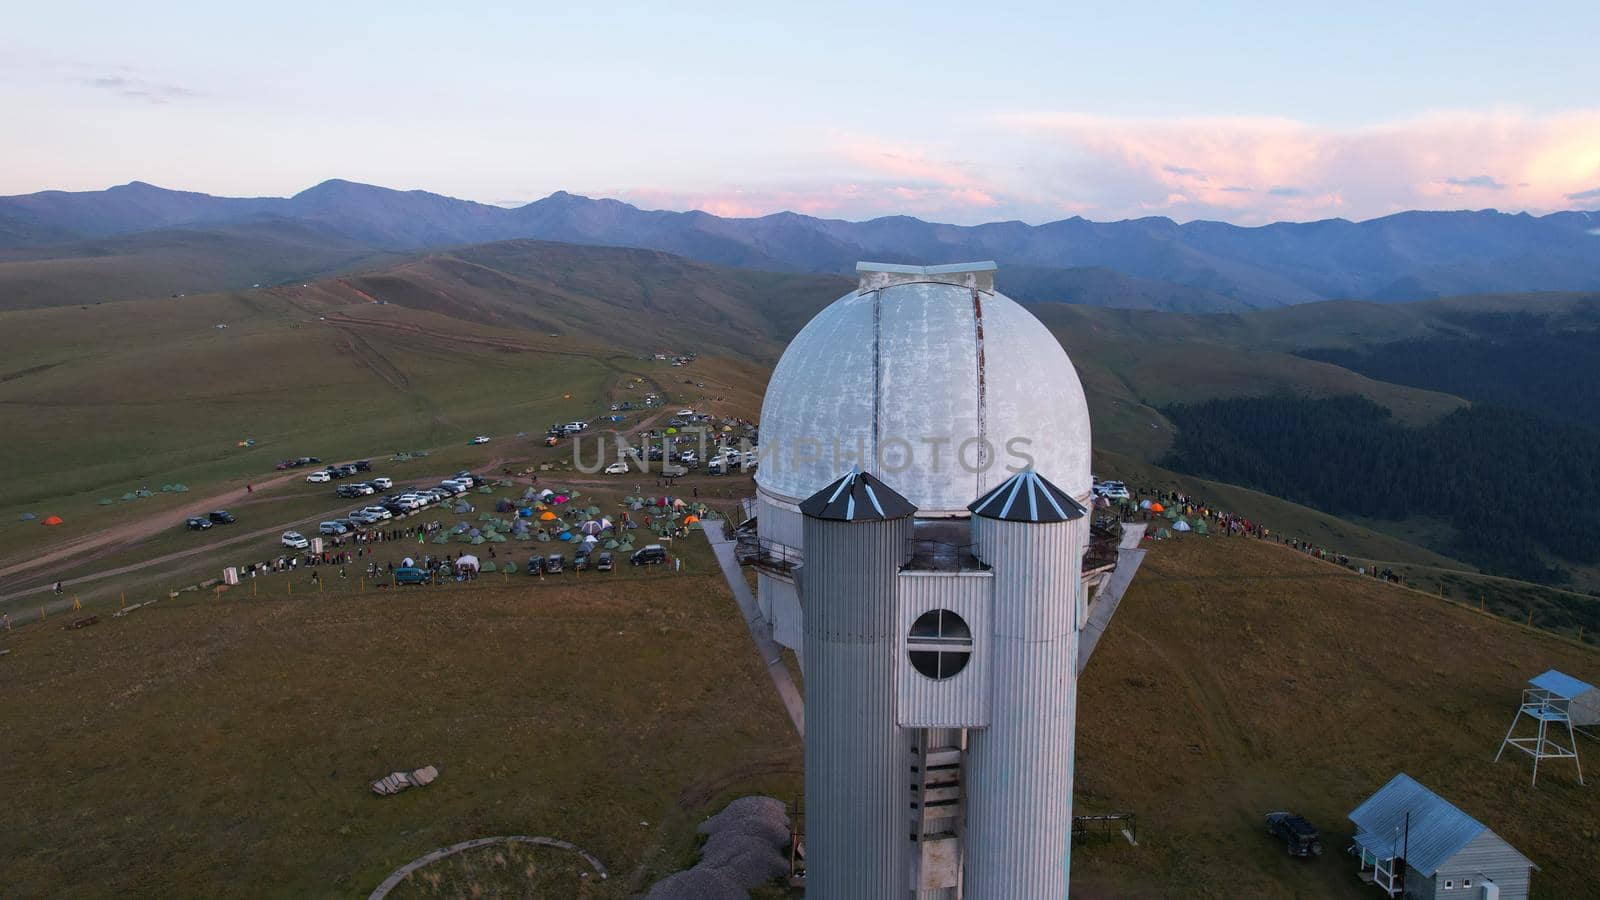 Two large telescope domes at sunset. Drone view by Passcal